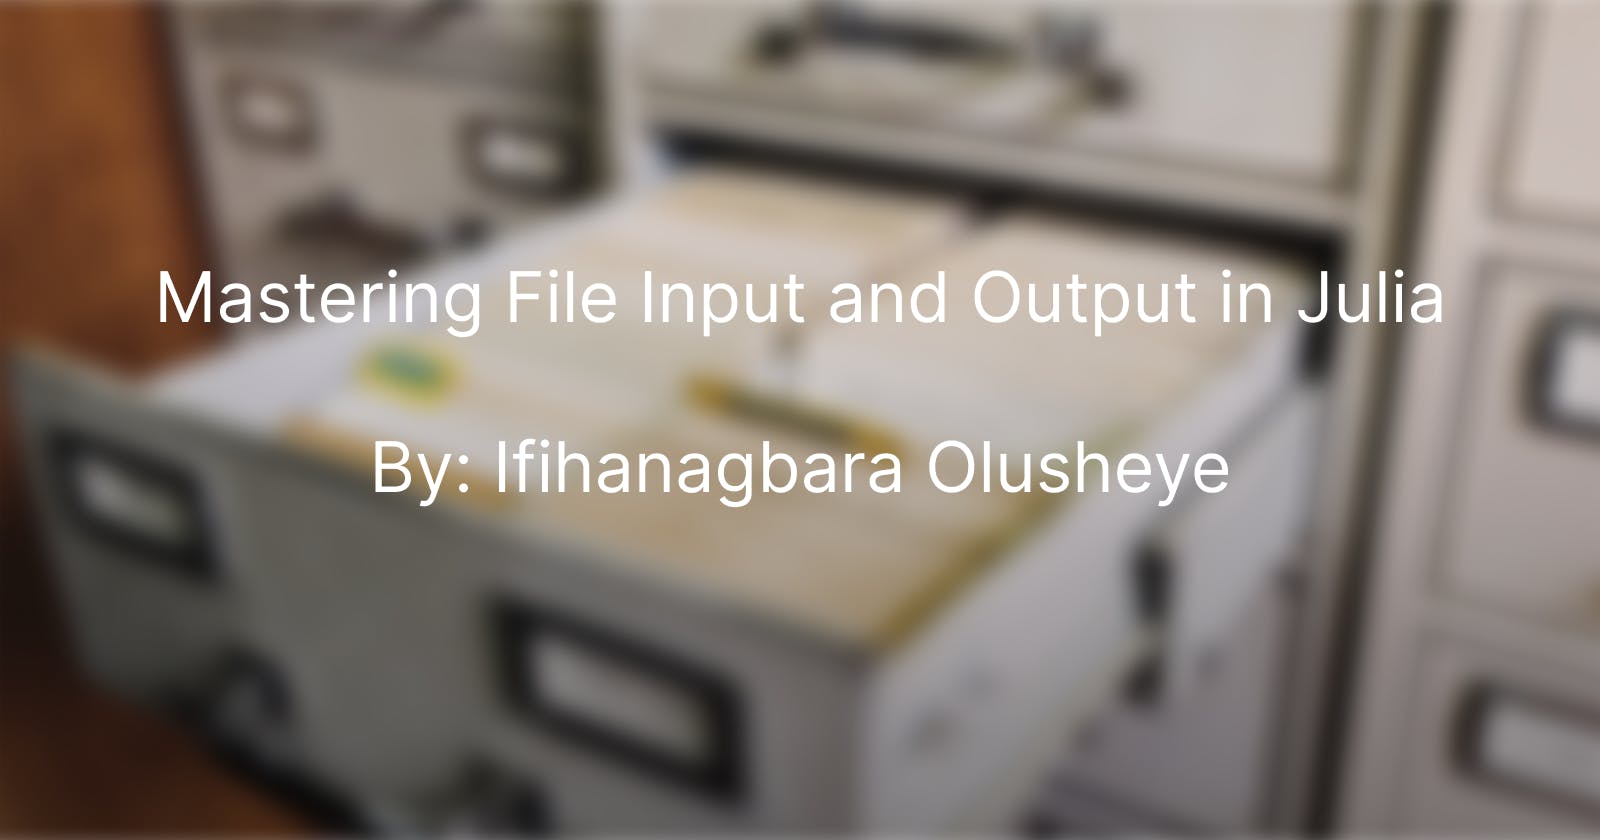 Mastering File Input and Output in Julia